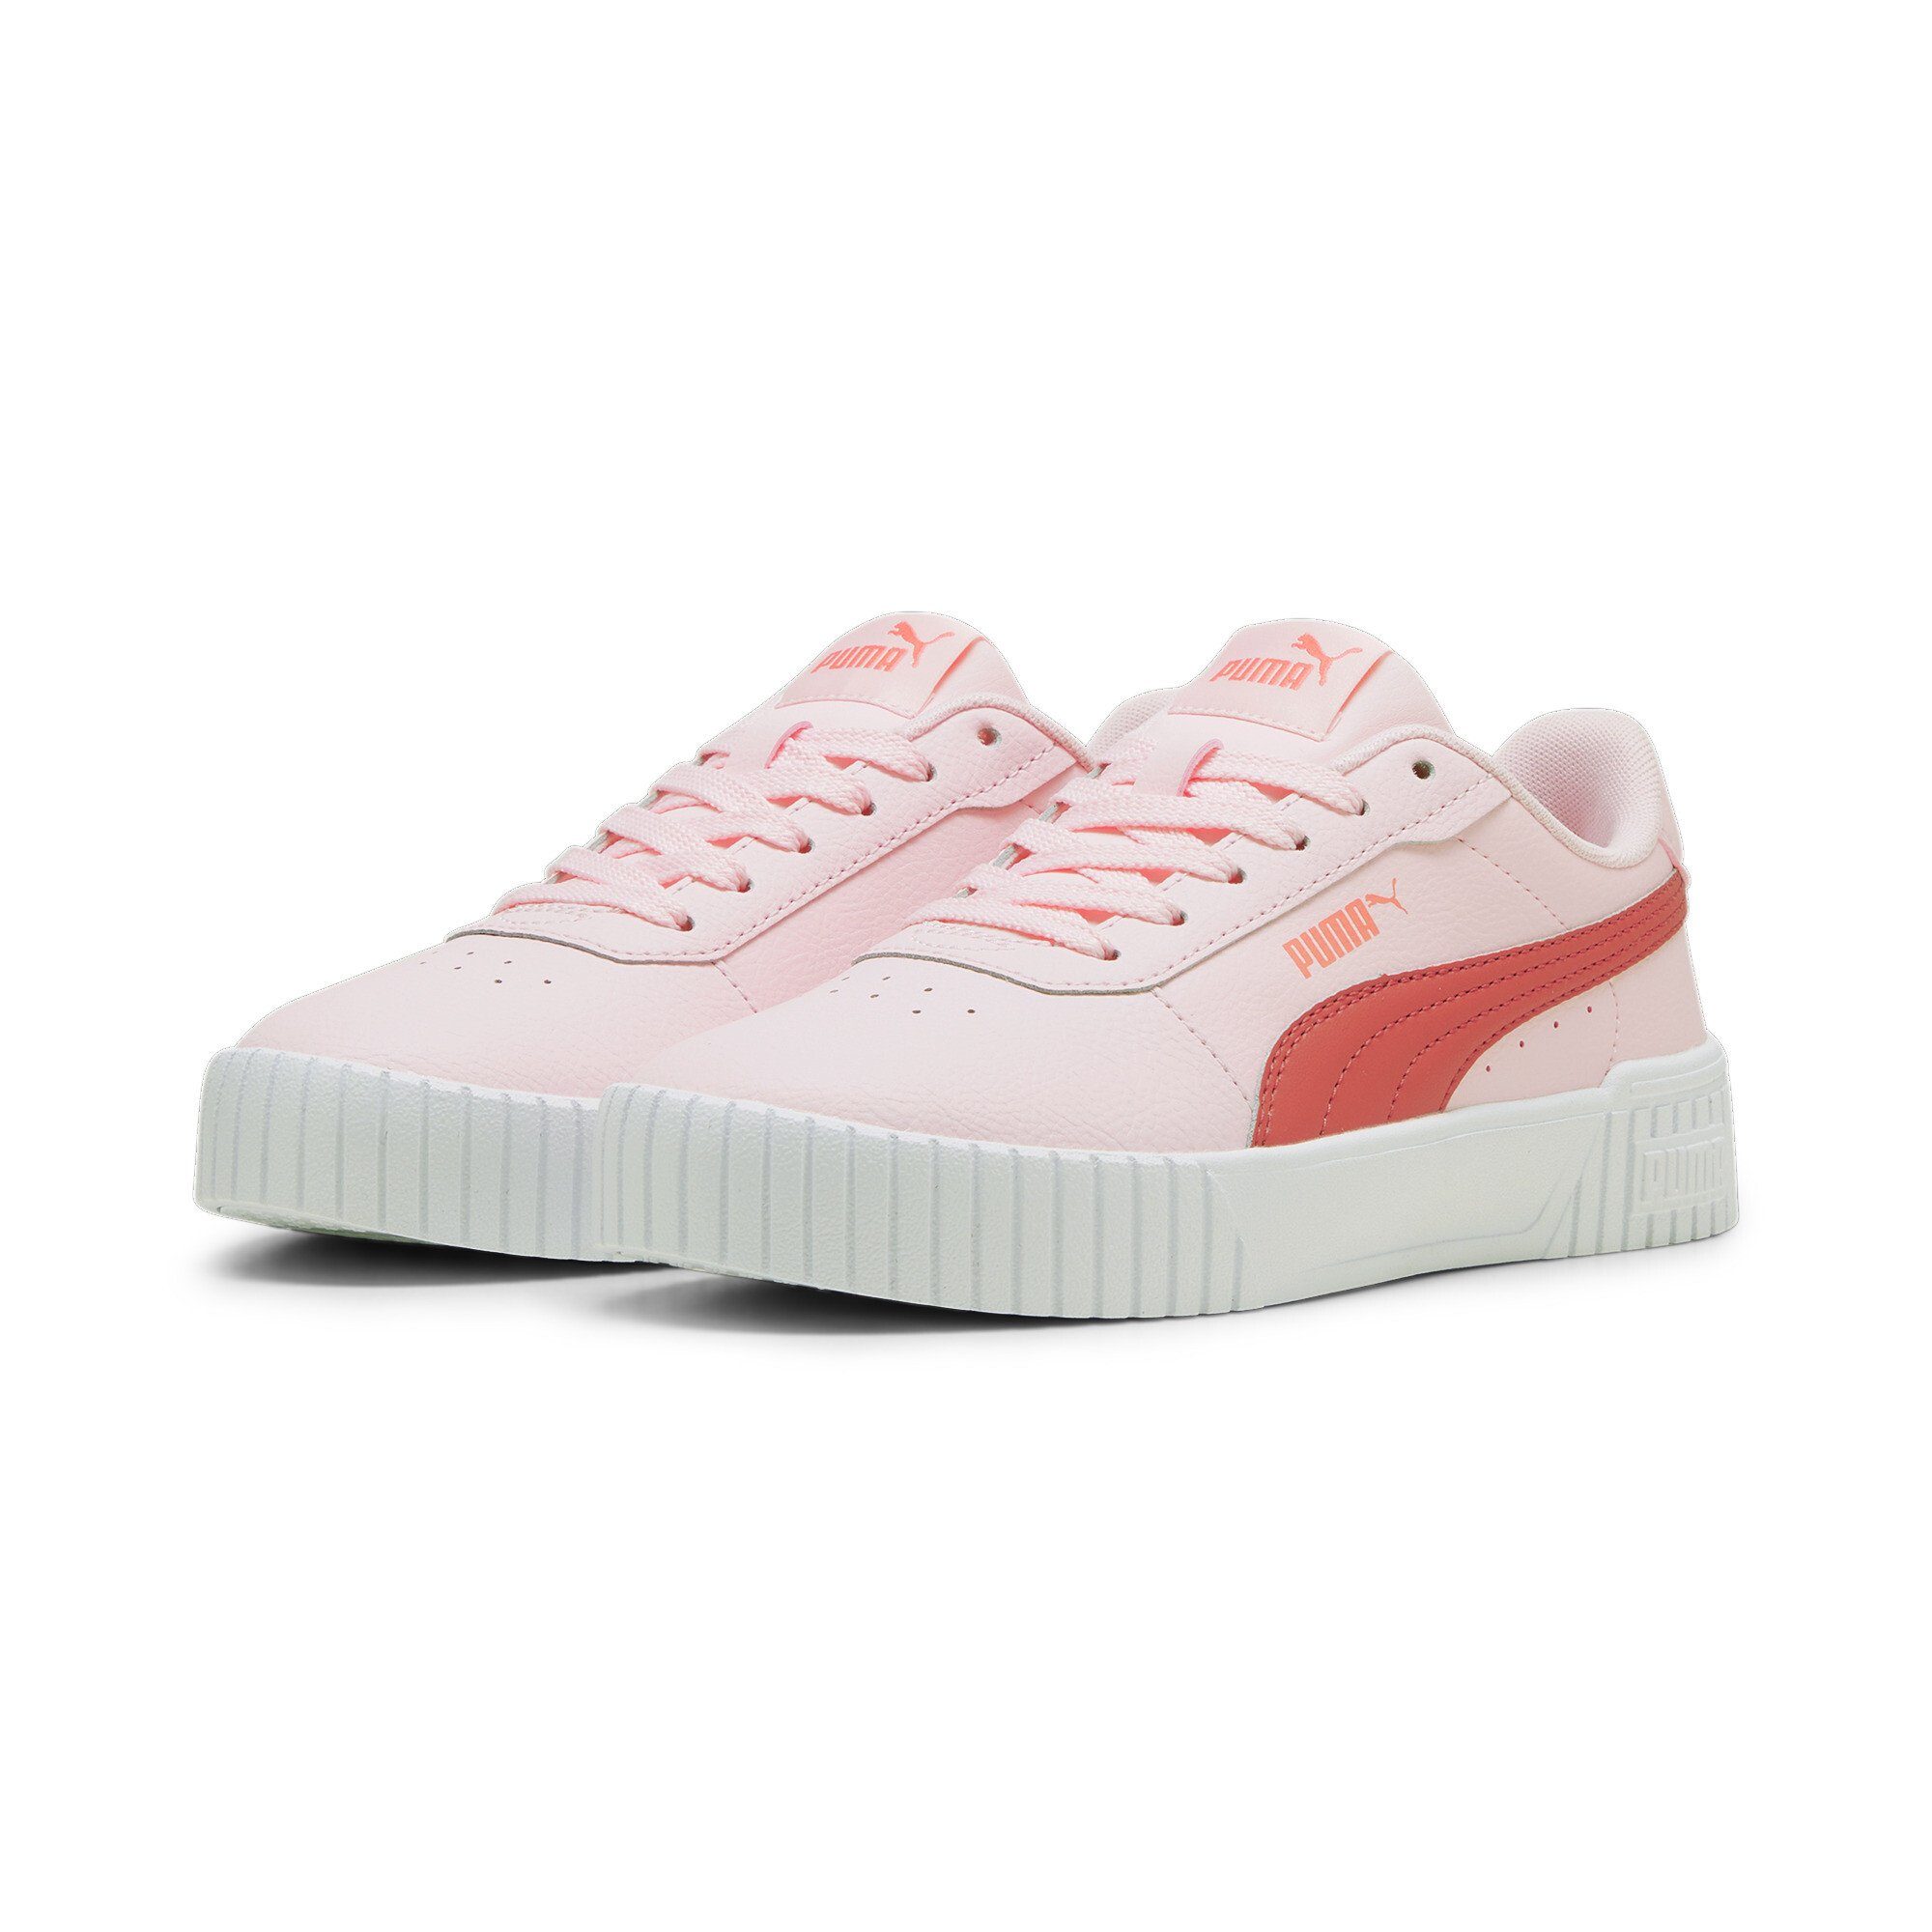 White 2.0 PUMA Carina Whisp Red Sneakers Active Pink Sneaker Jugendliche Of